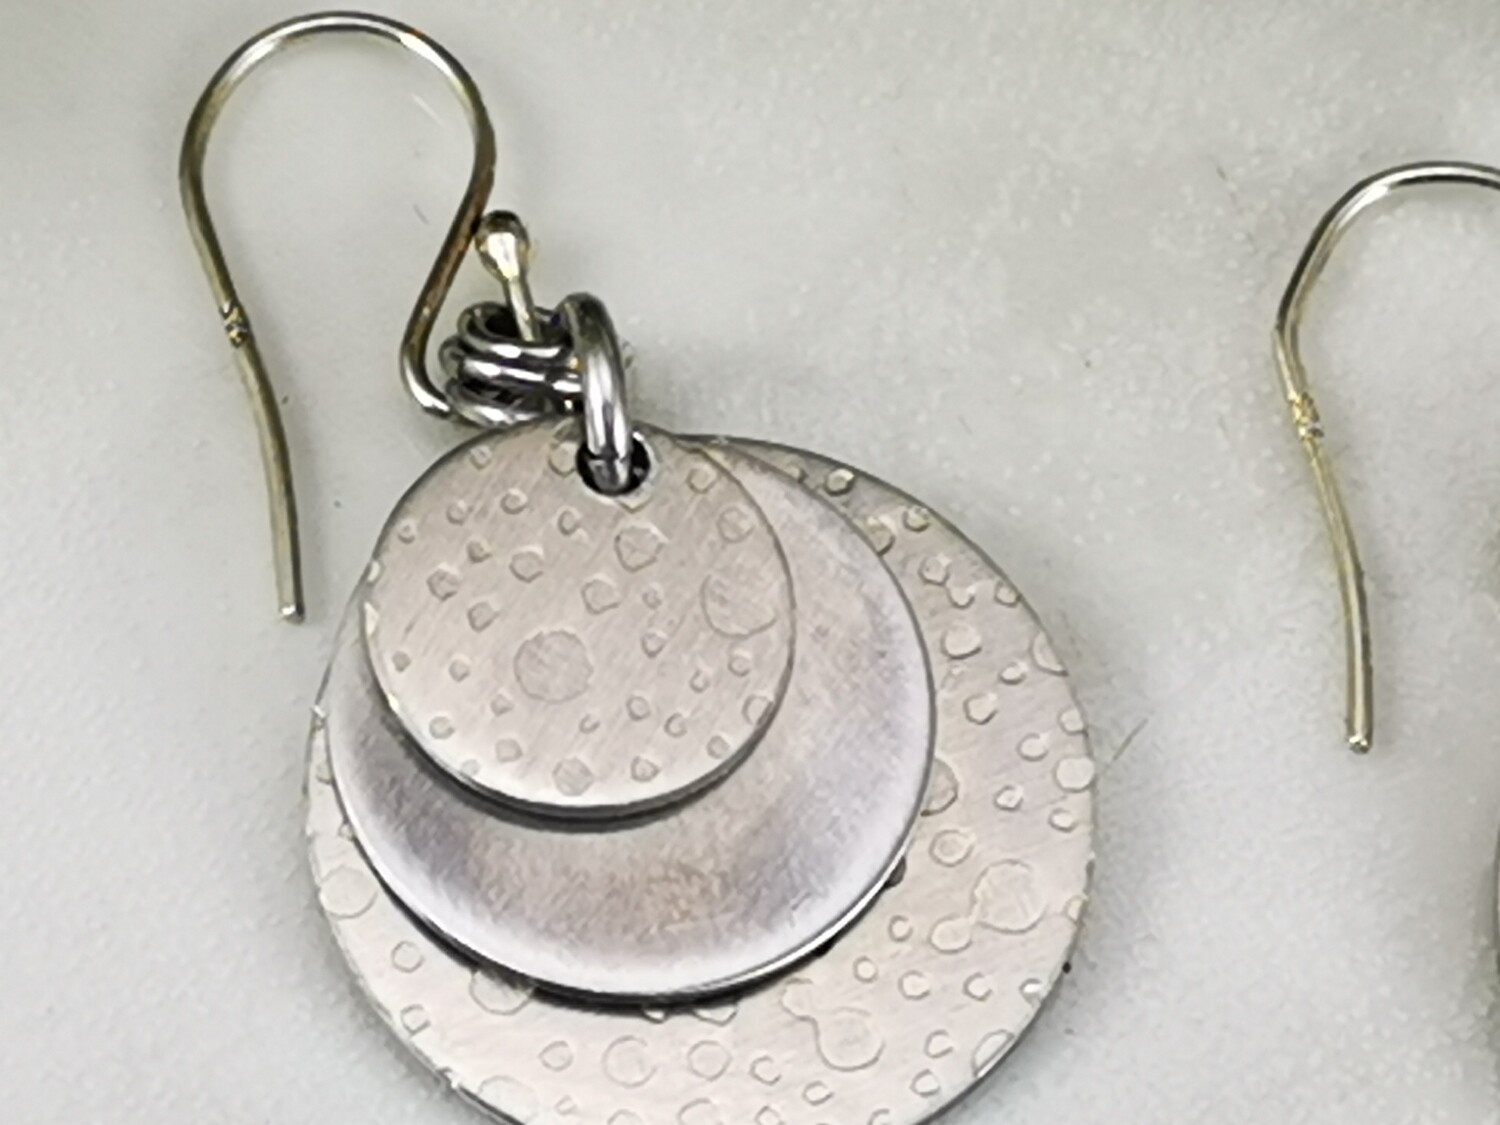 Aluminum, Circle, Round Earrings with a Bubble Patterned Texture, Lightweight, Gifts for Her